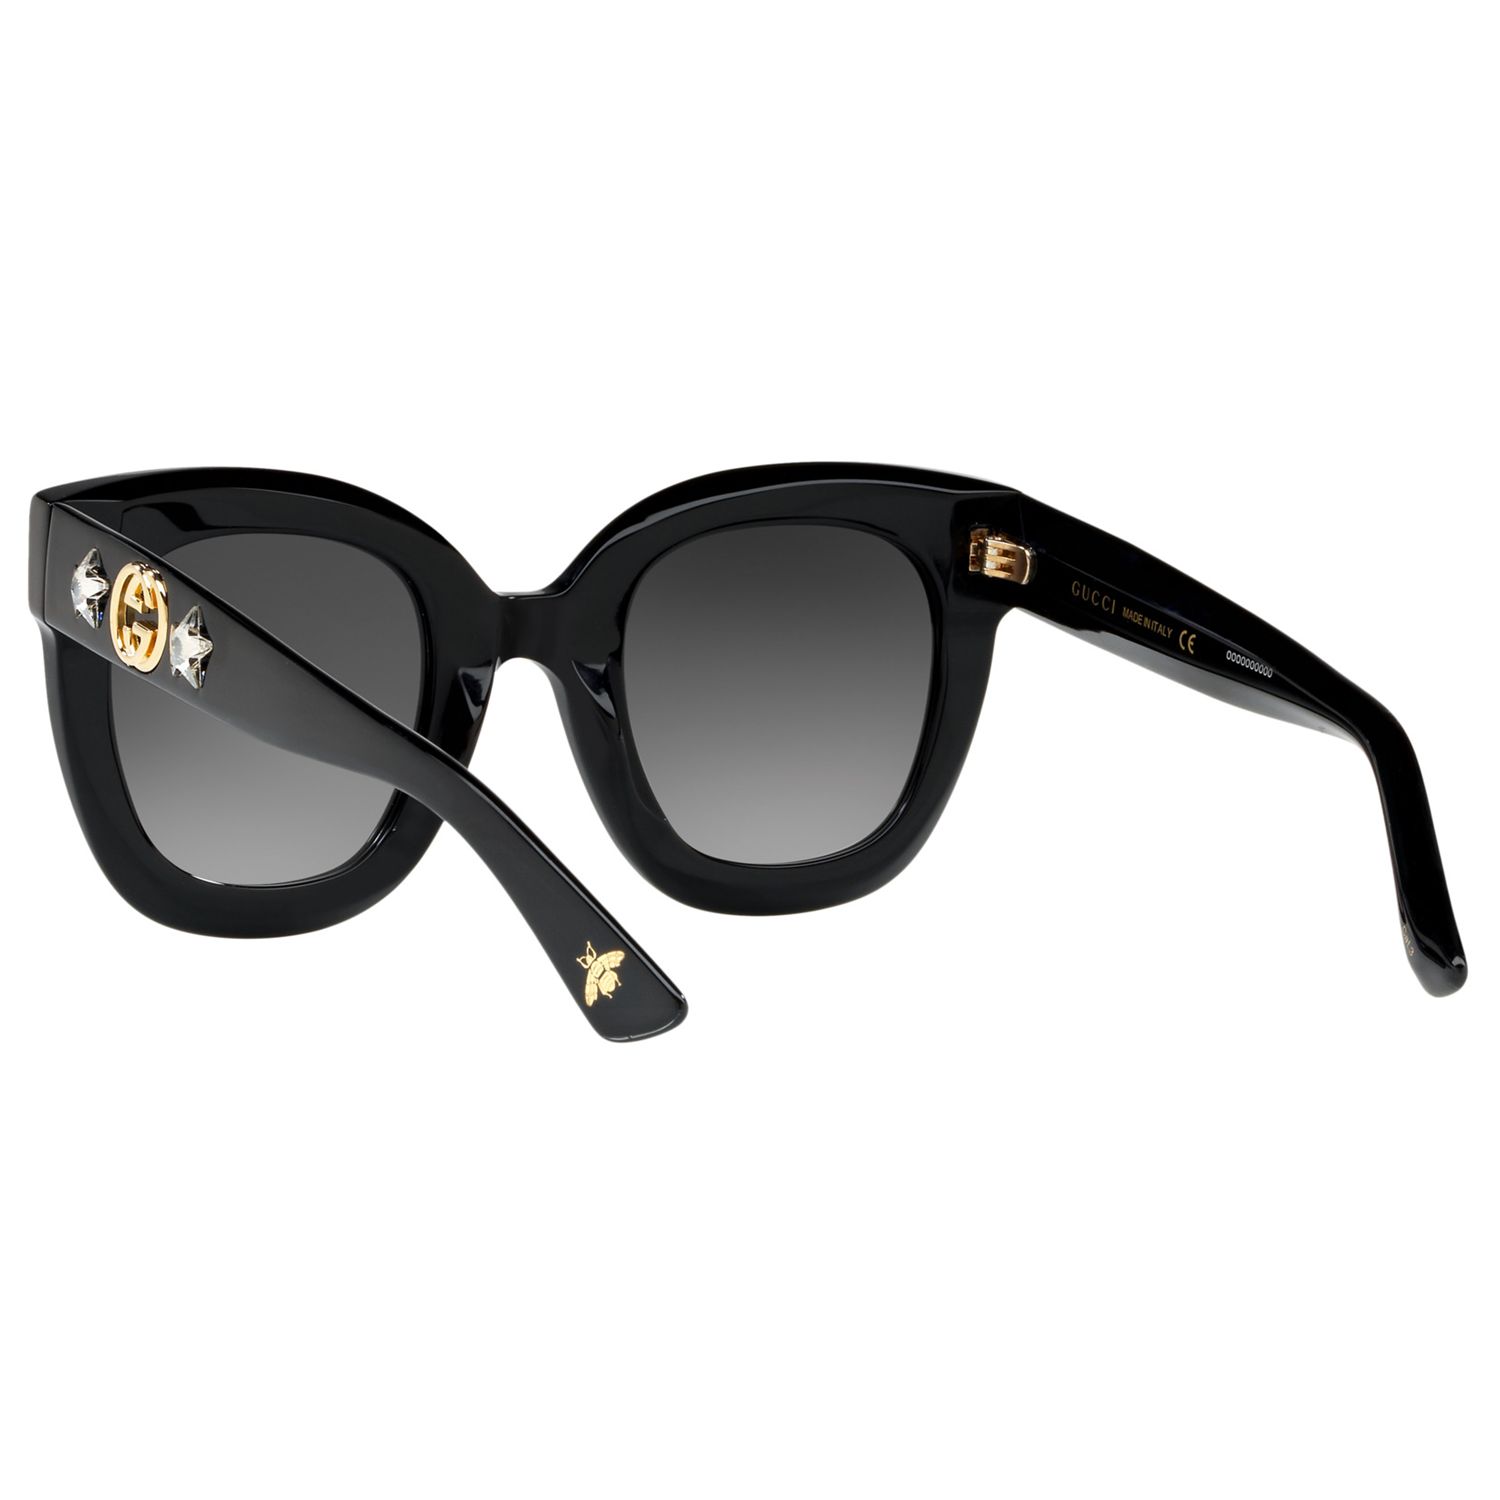 Buy Gucci GG0208S Statement Oval Sunglasses Online at johnlewis.com